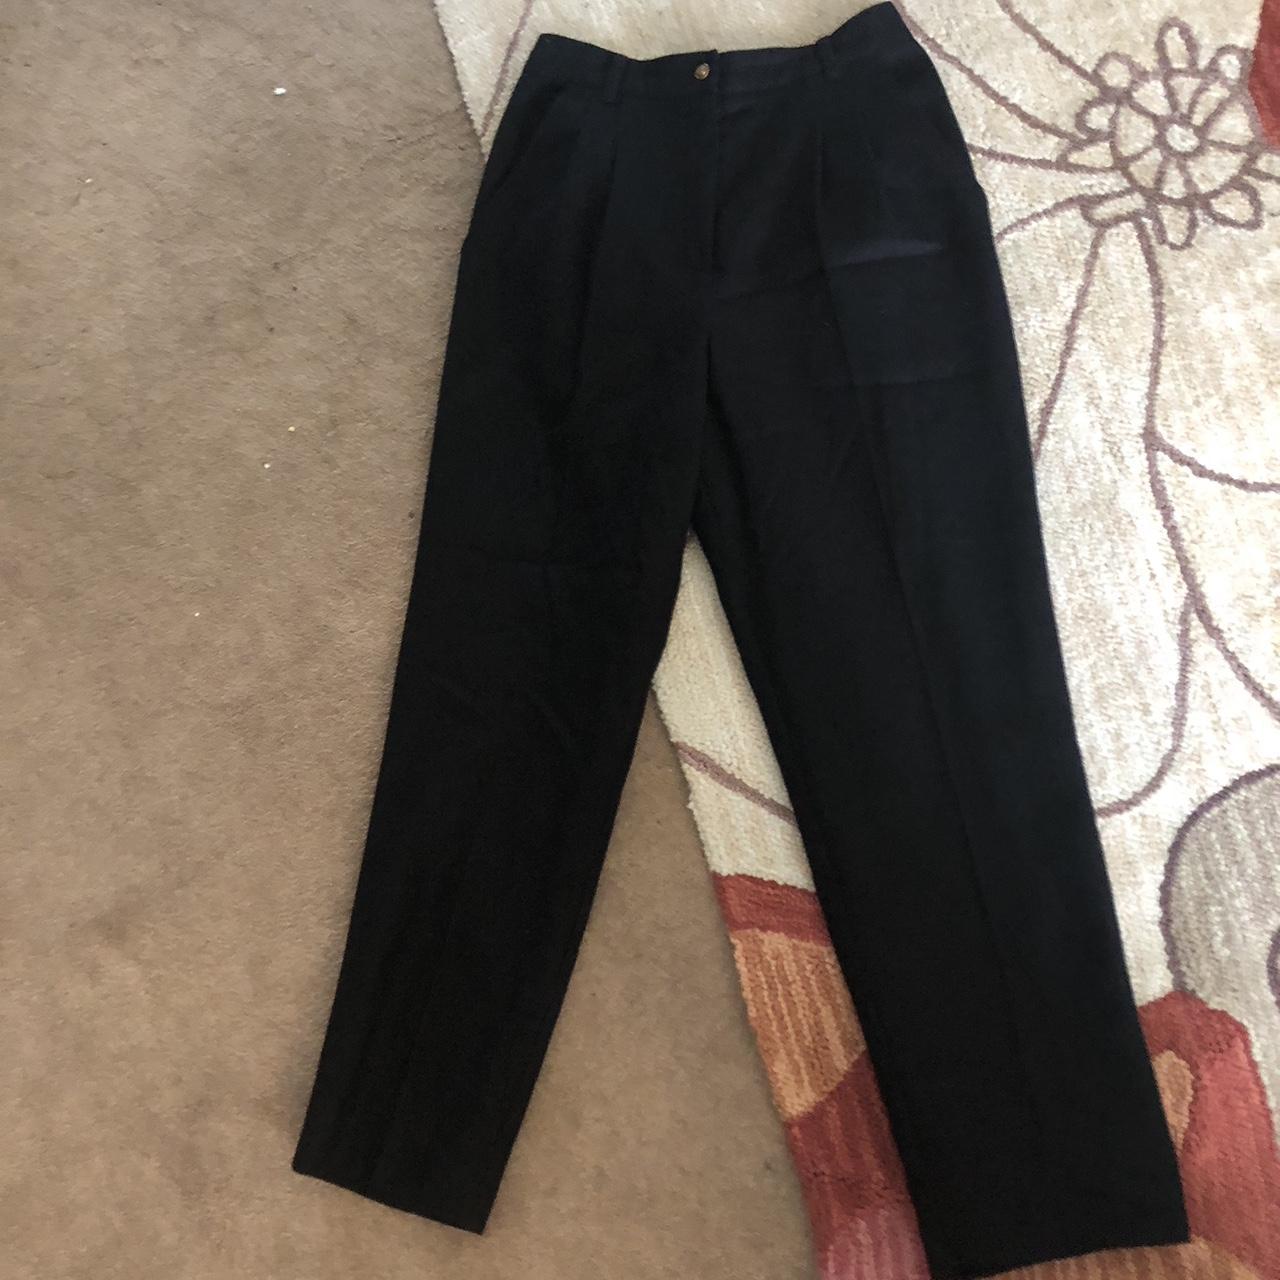 Sag Harbor Women's Black and Gold Trousers | Depop